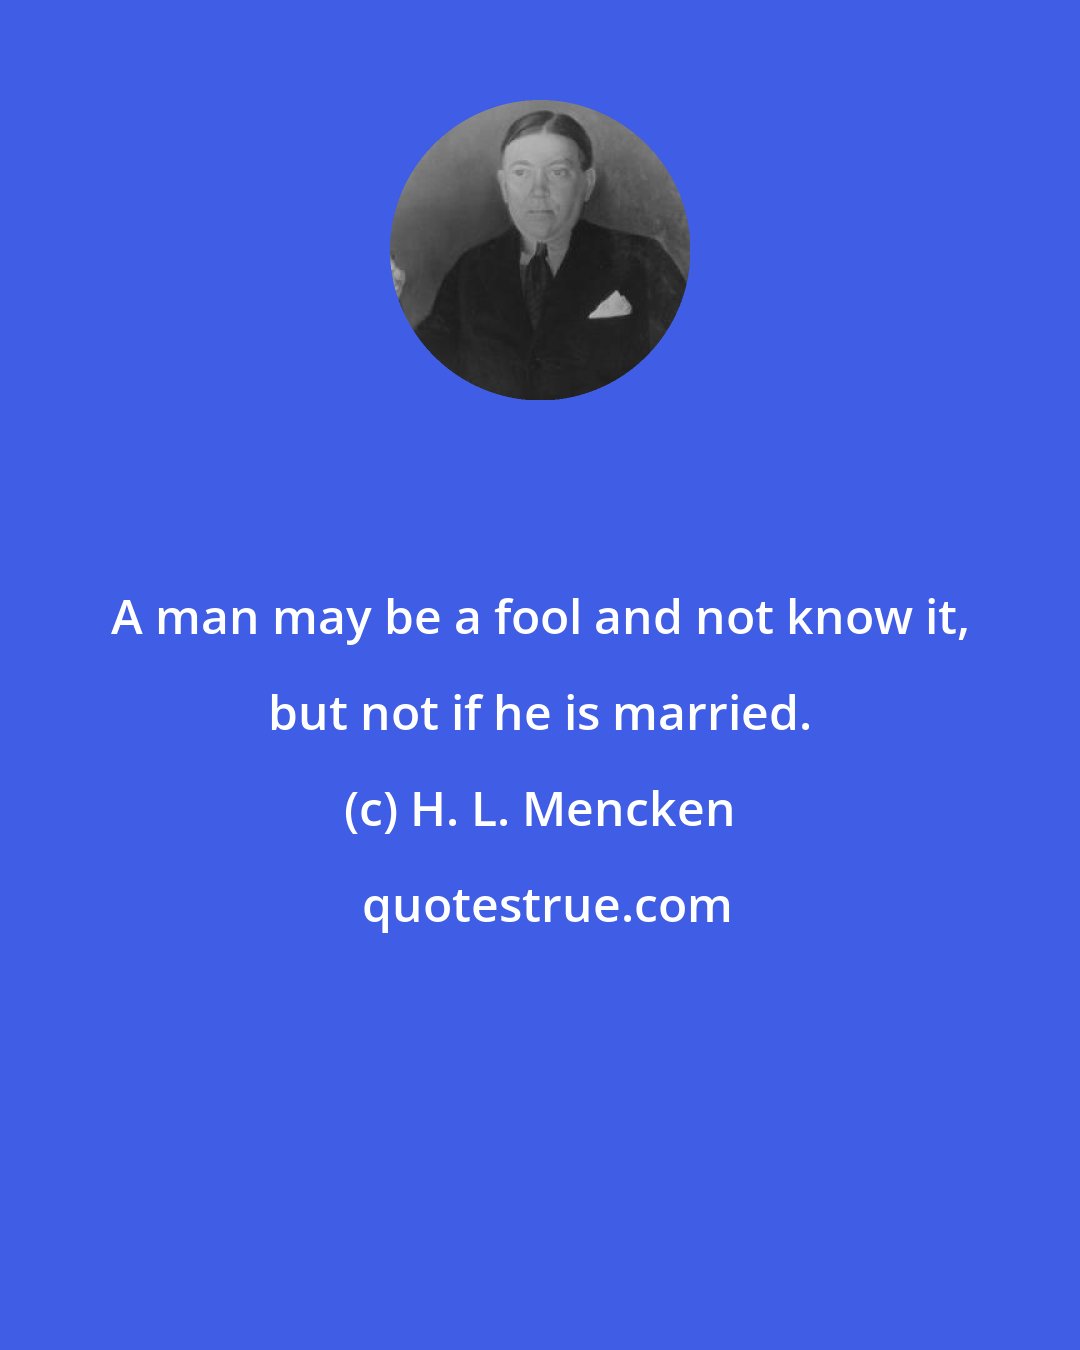 H. L. Mencken: A man may be a fool and not know it, but not if he is married.